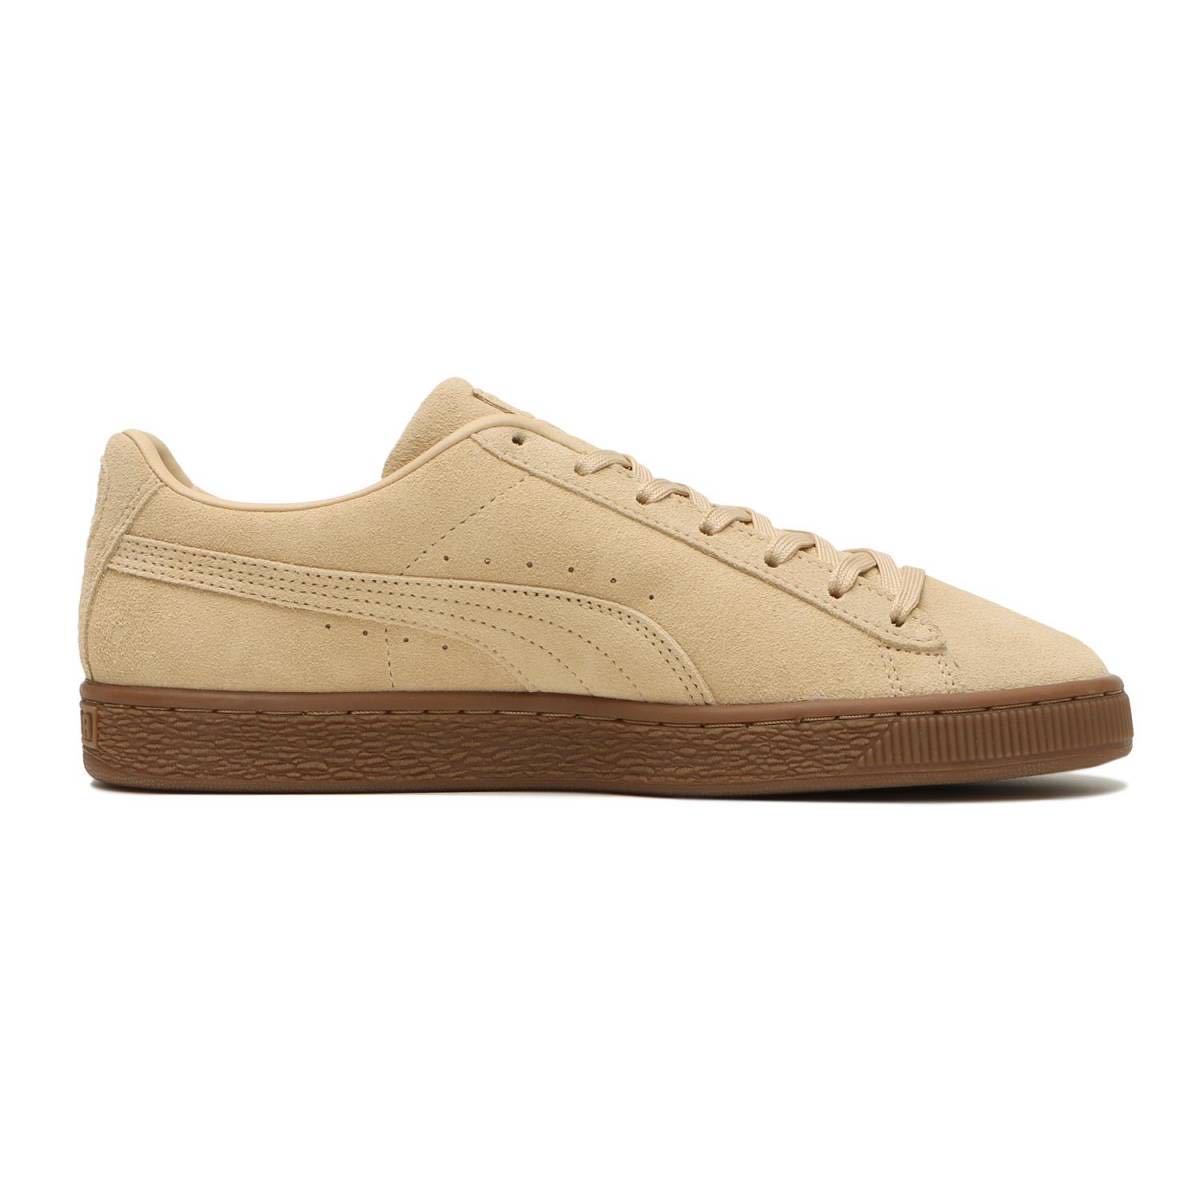  tube MS166b* new goods /30cm* Puma suede chewing gum sole Suede Gum Pebble beige group 381174-02* suede 